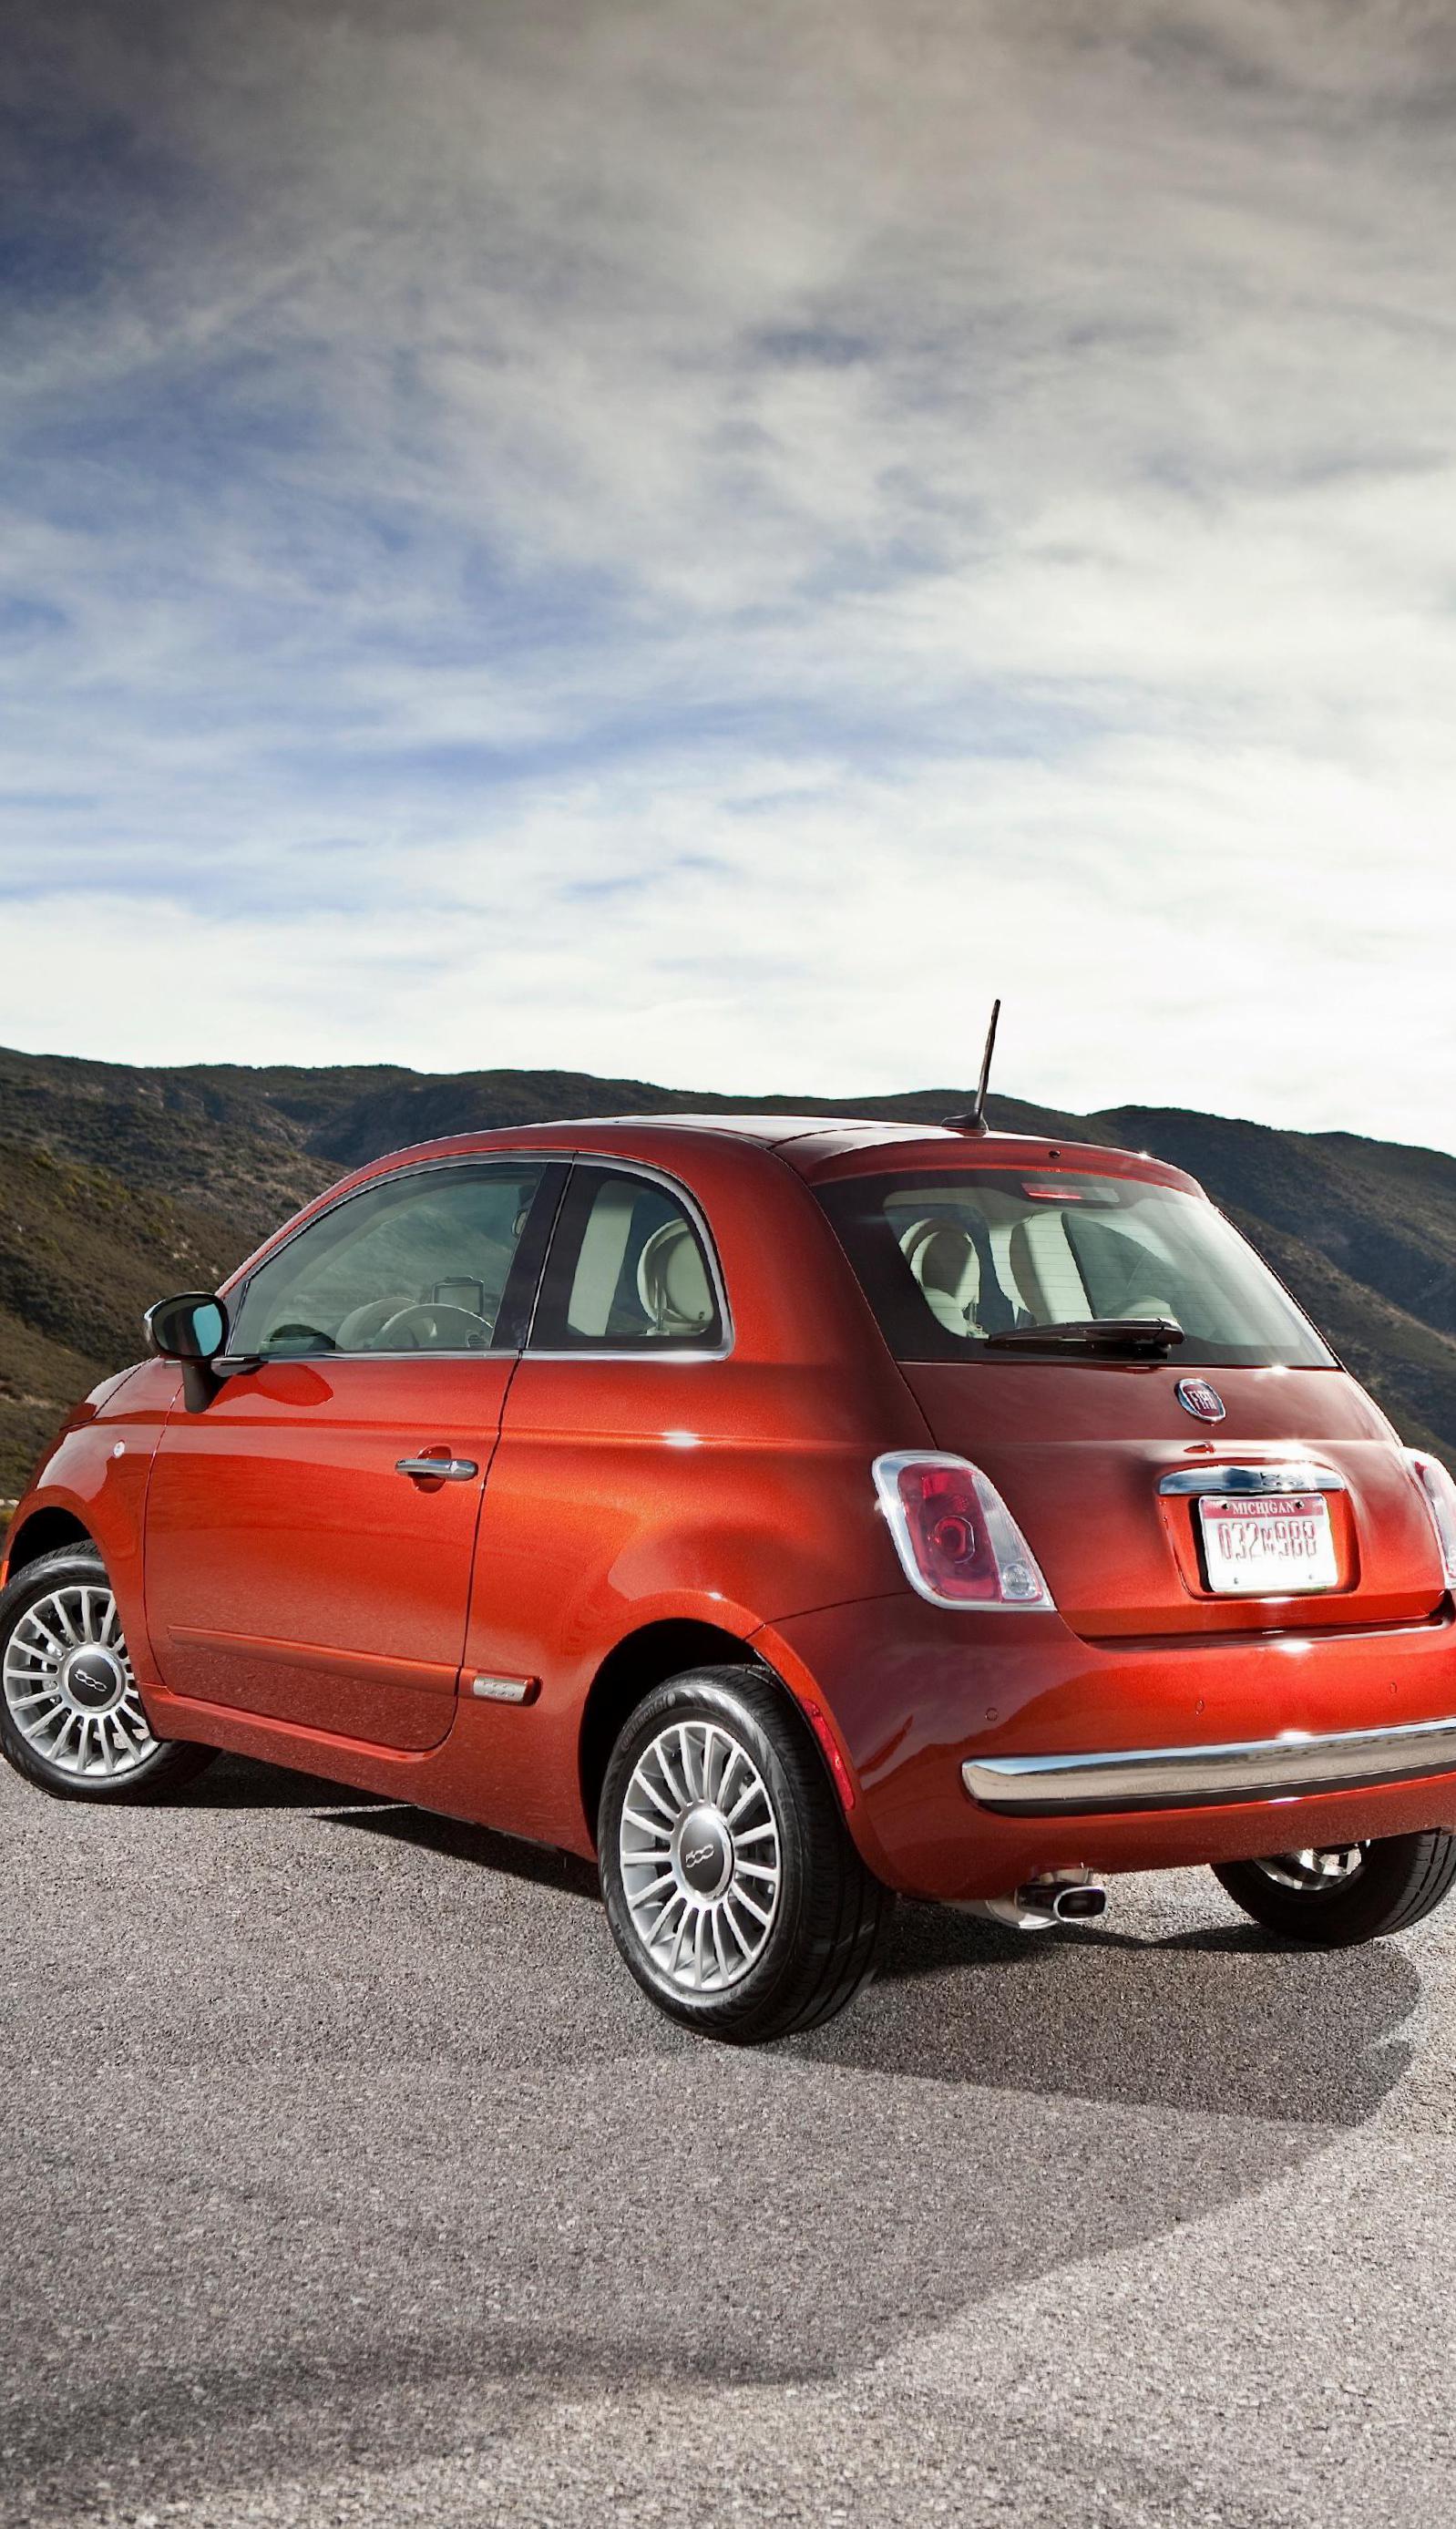 500 Fiat Specification 2009